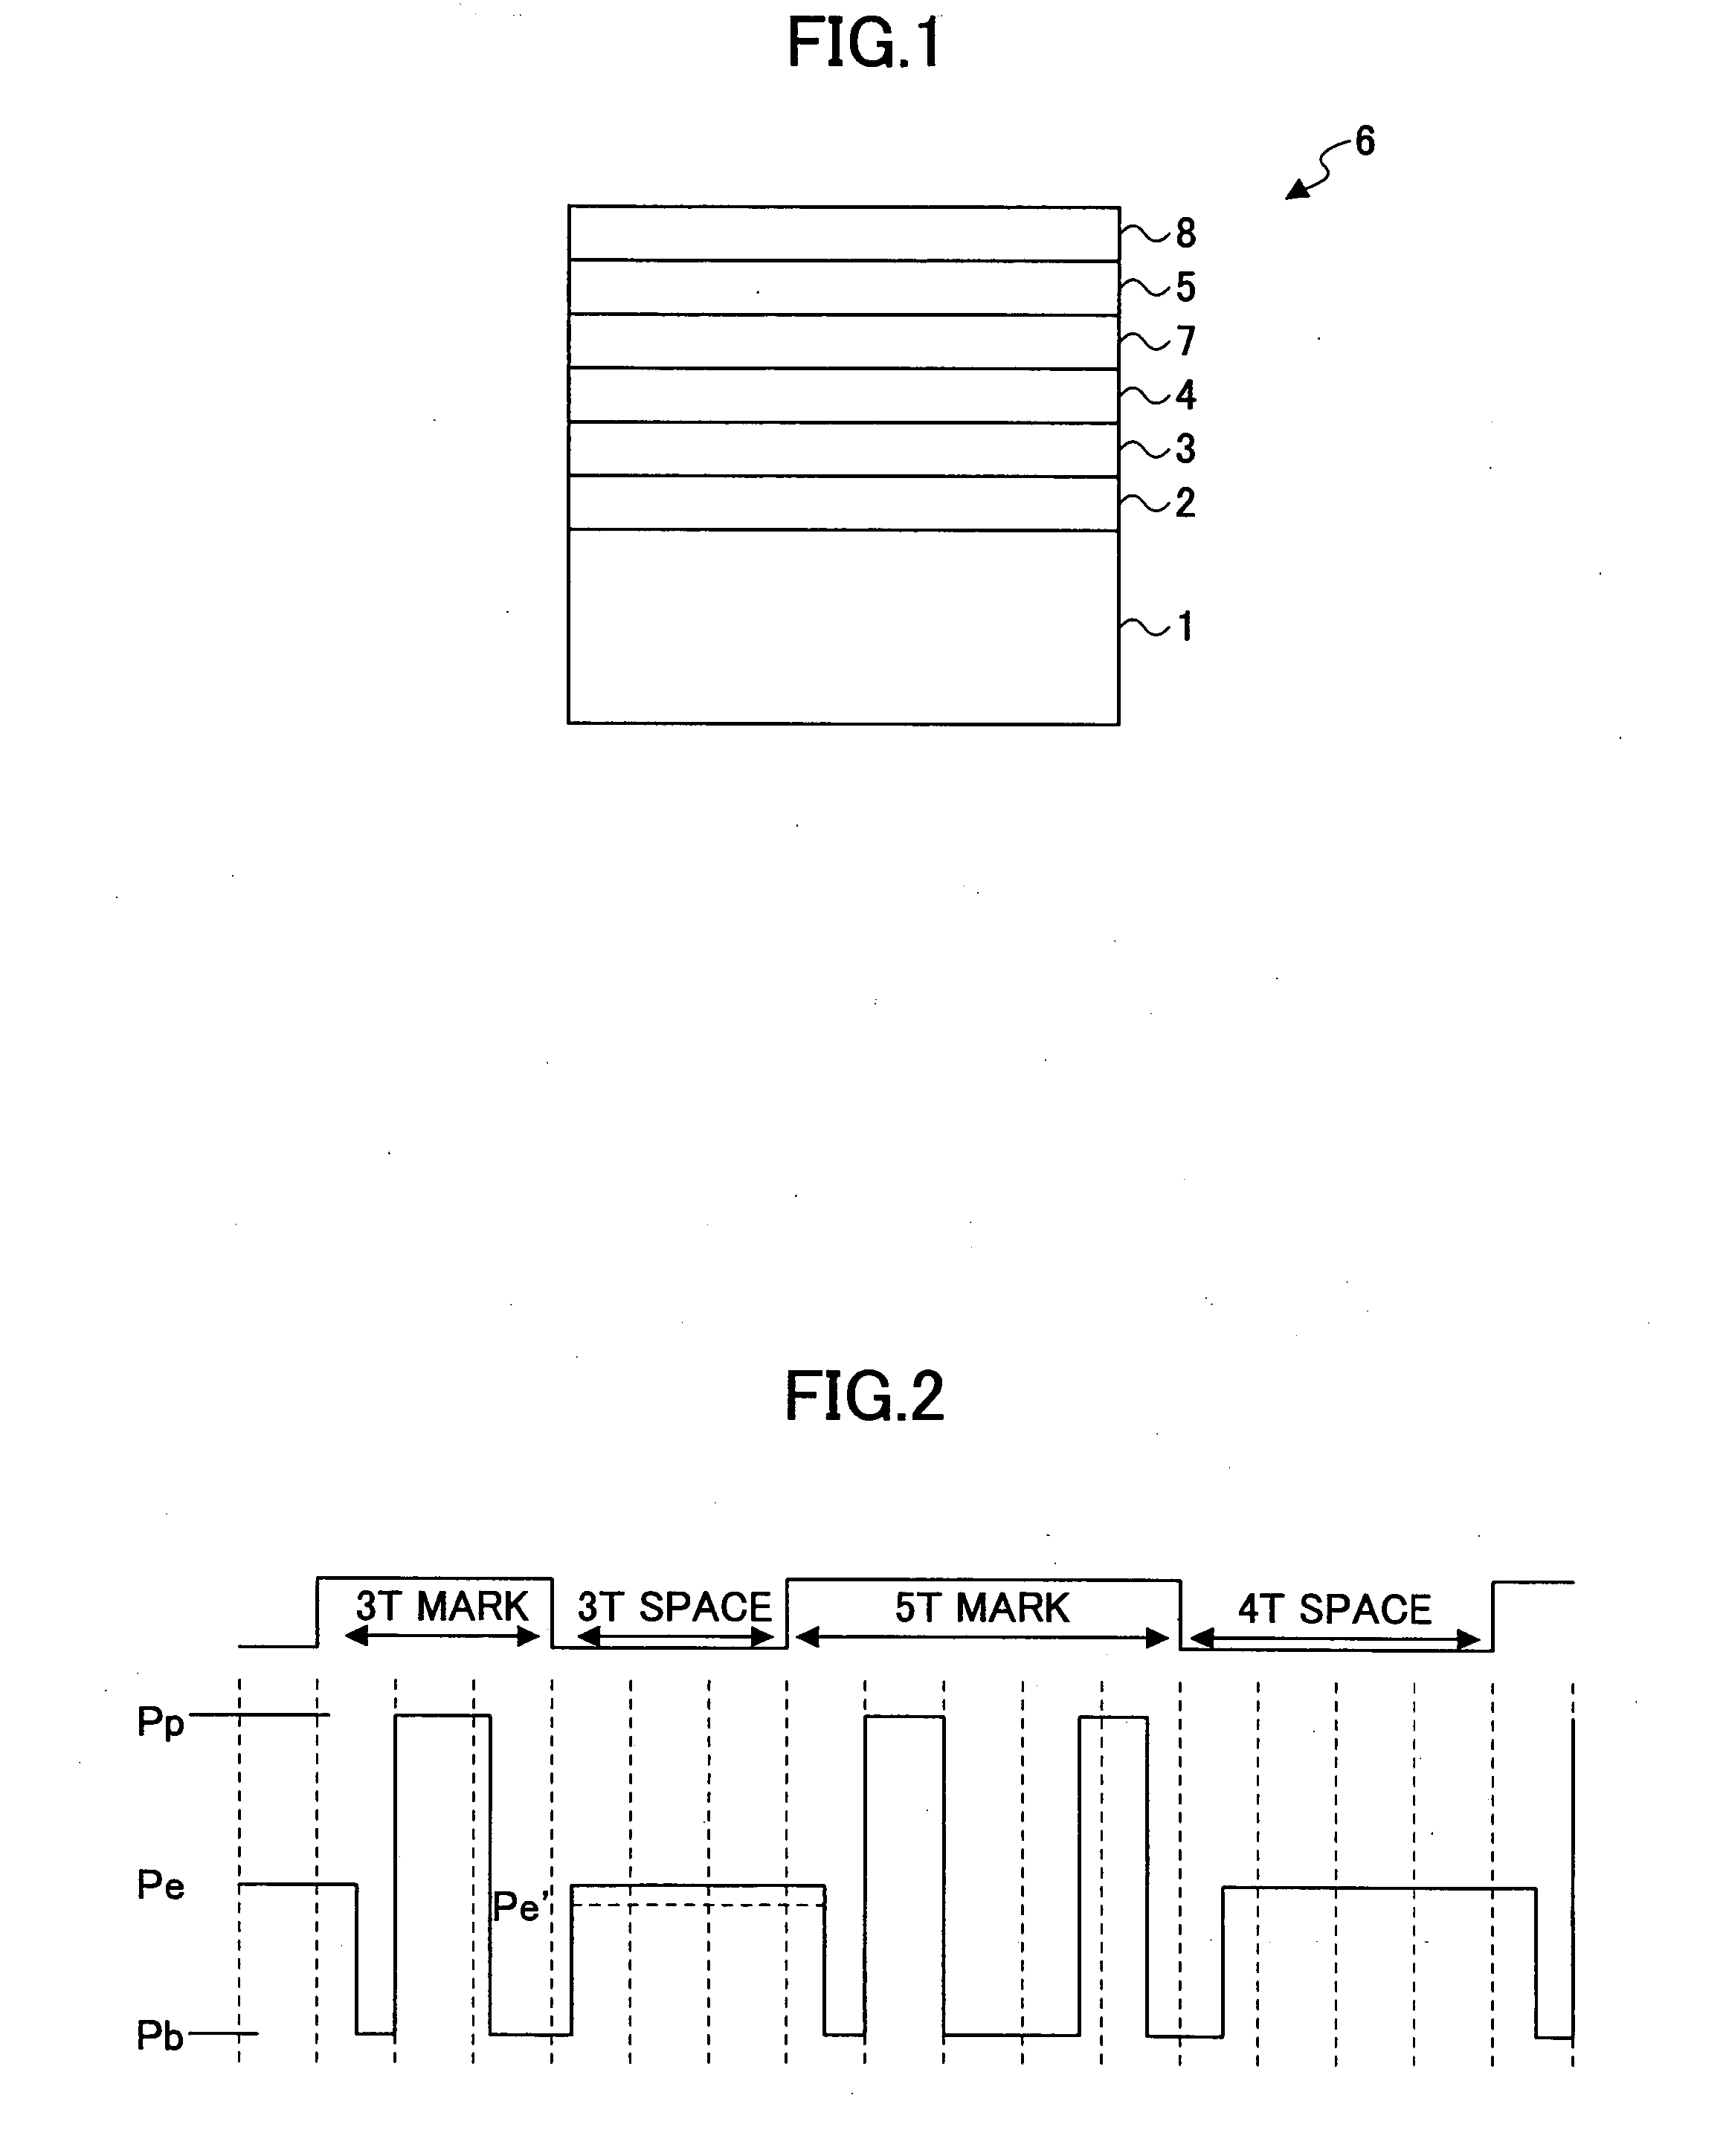 Optical information recording method and optical information recording apparatus